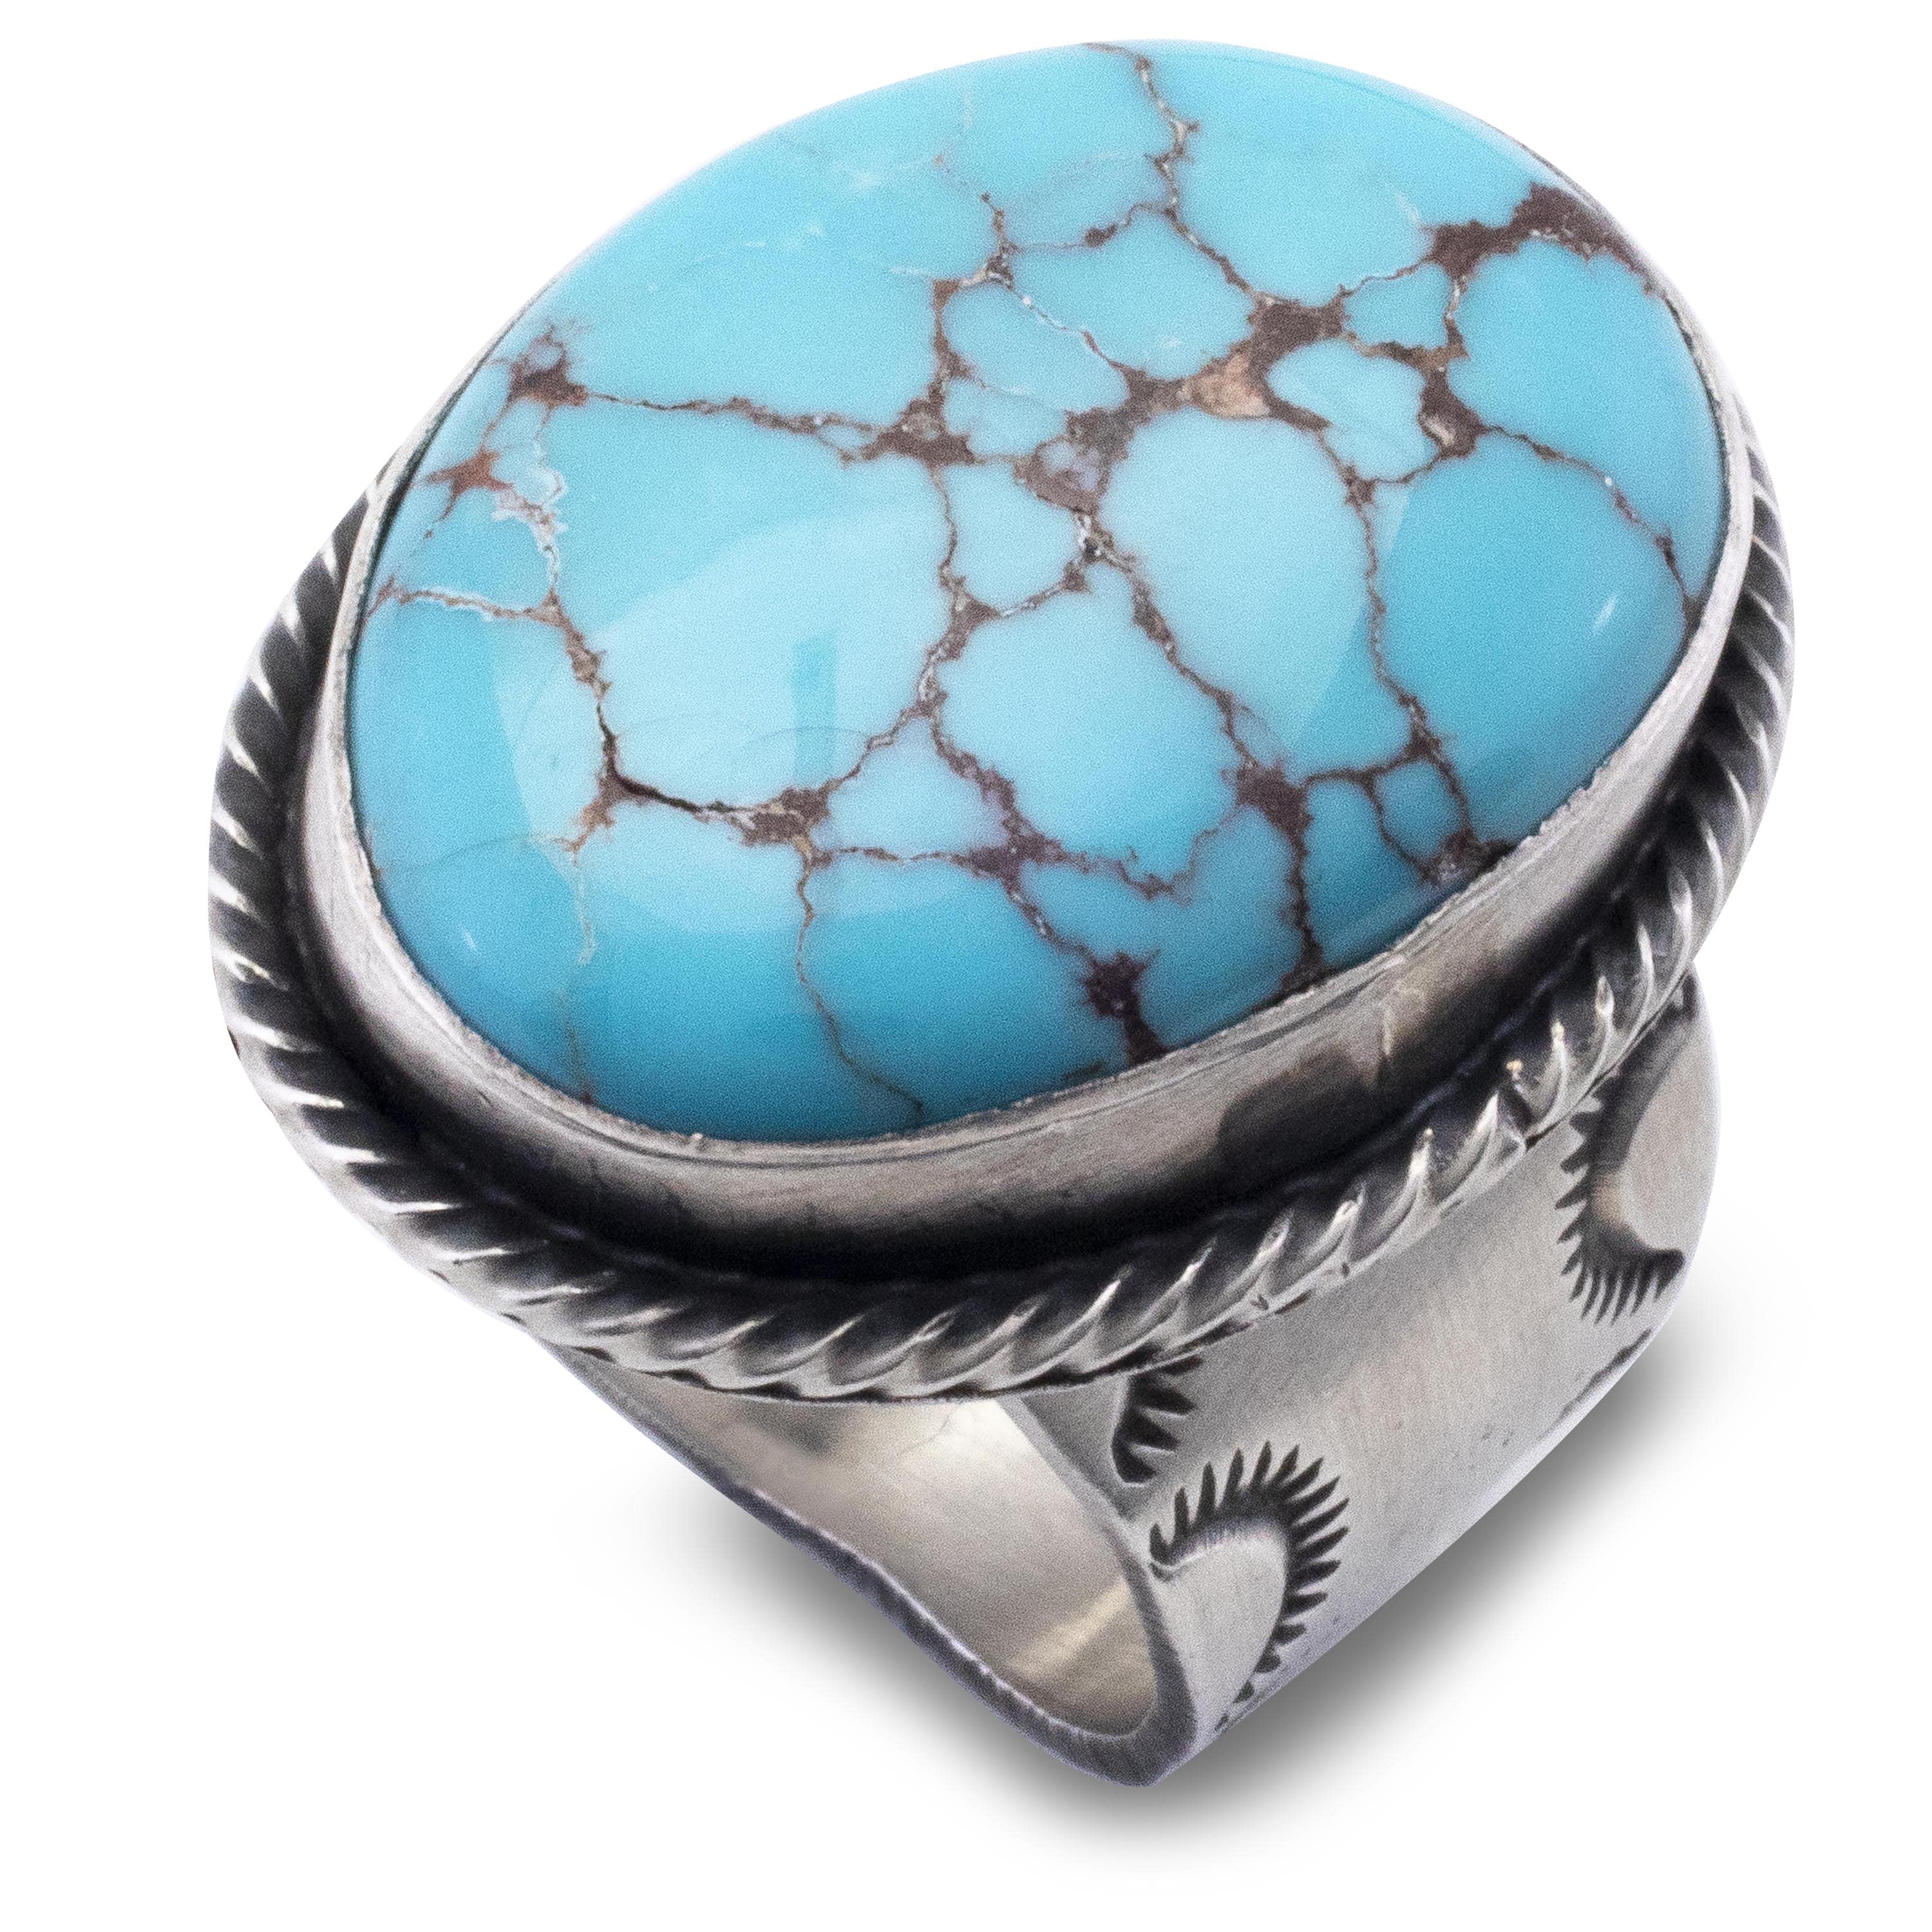 Kalifano Native American Jewelry 8 Prince Turquoise USA Native American Made 925 Sterling Silver Ring NAR1200.048.9